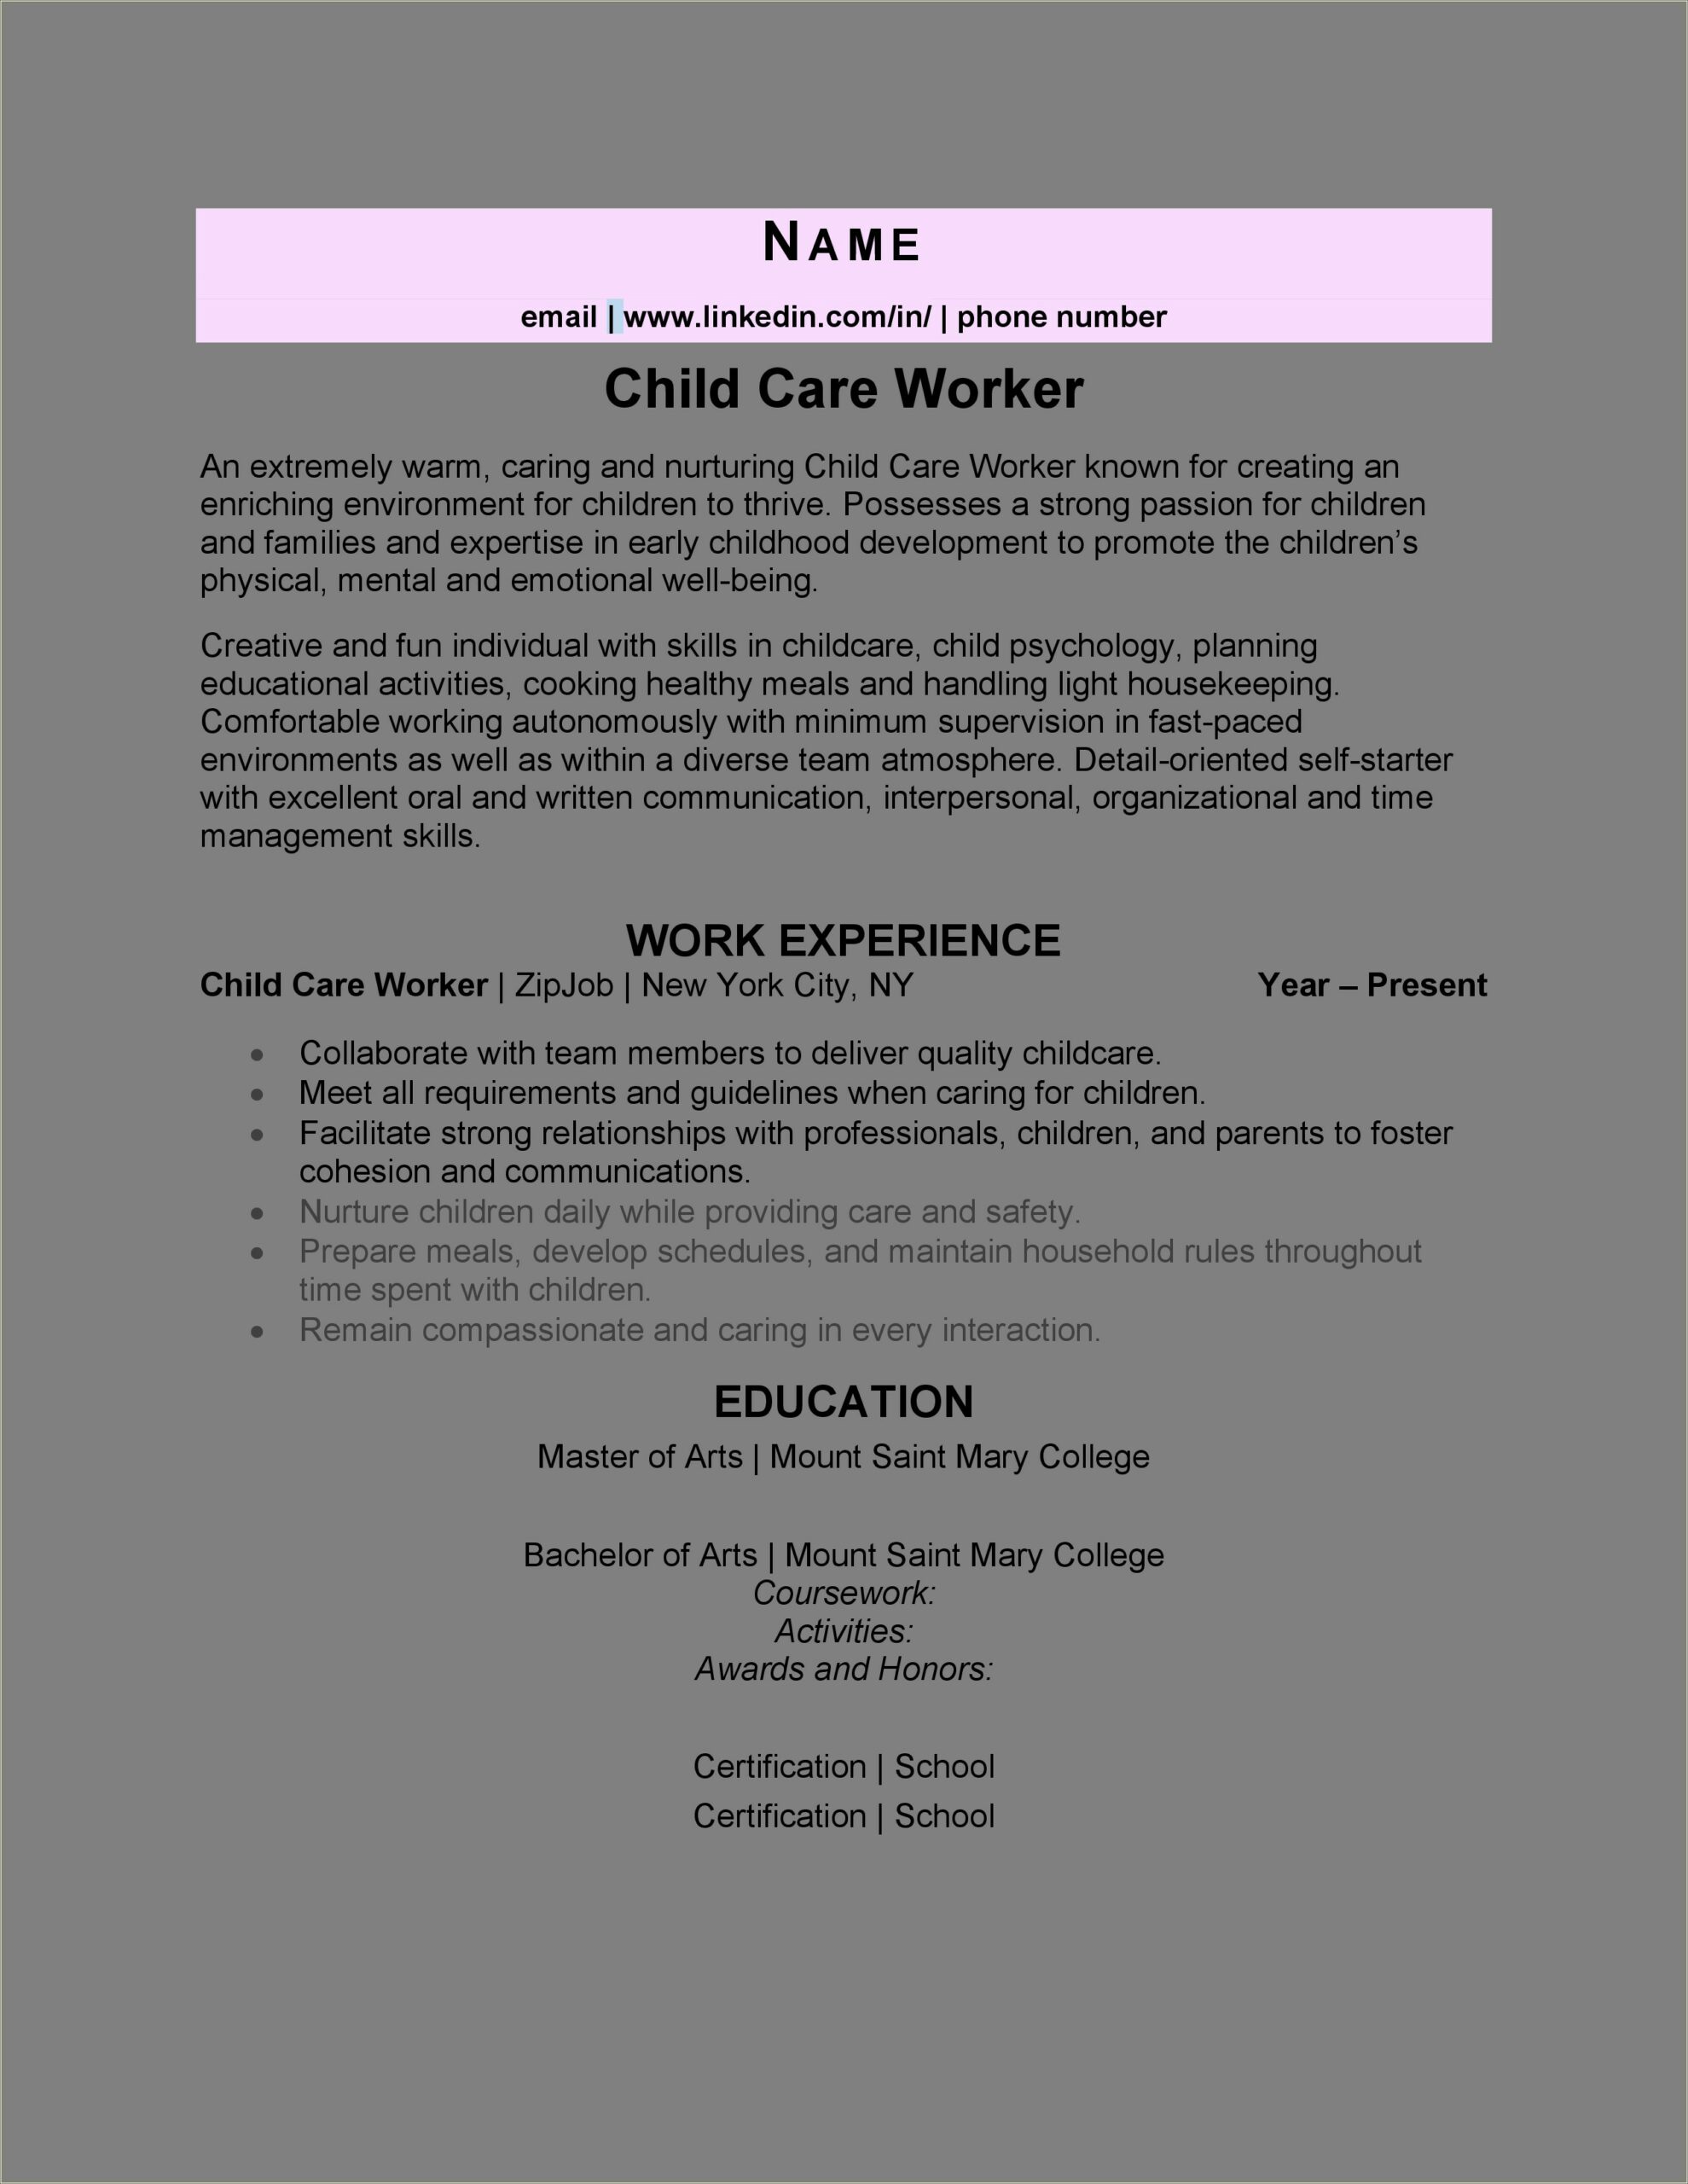 Resume Verbage For Day Daycare Worker